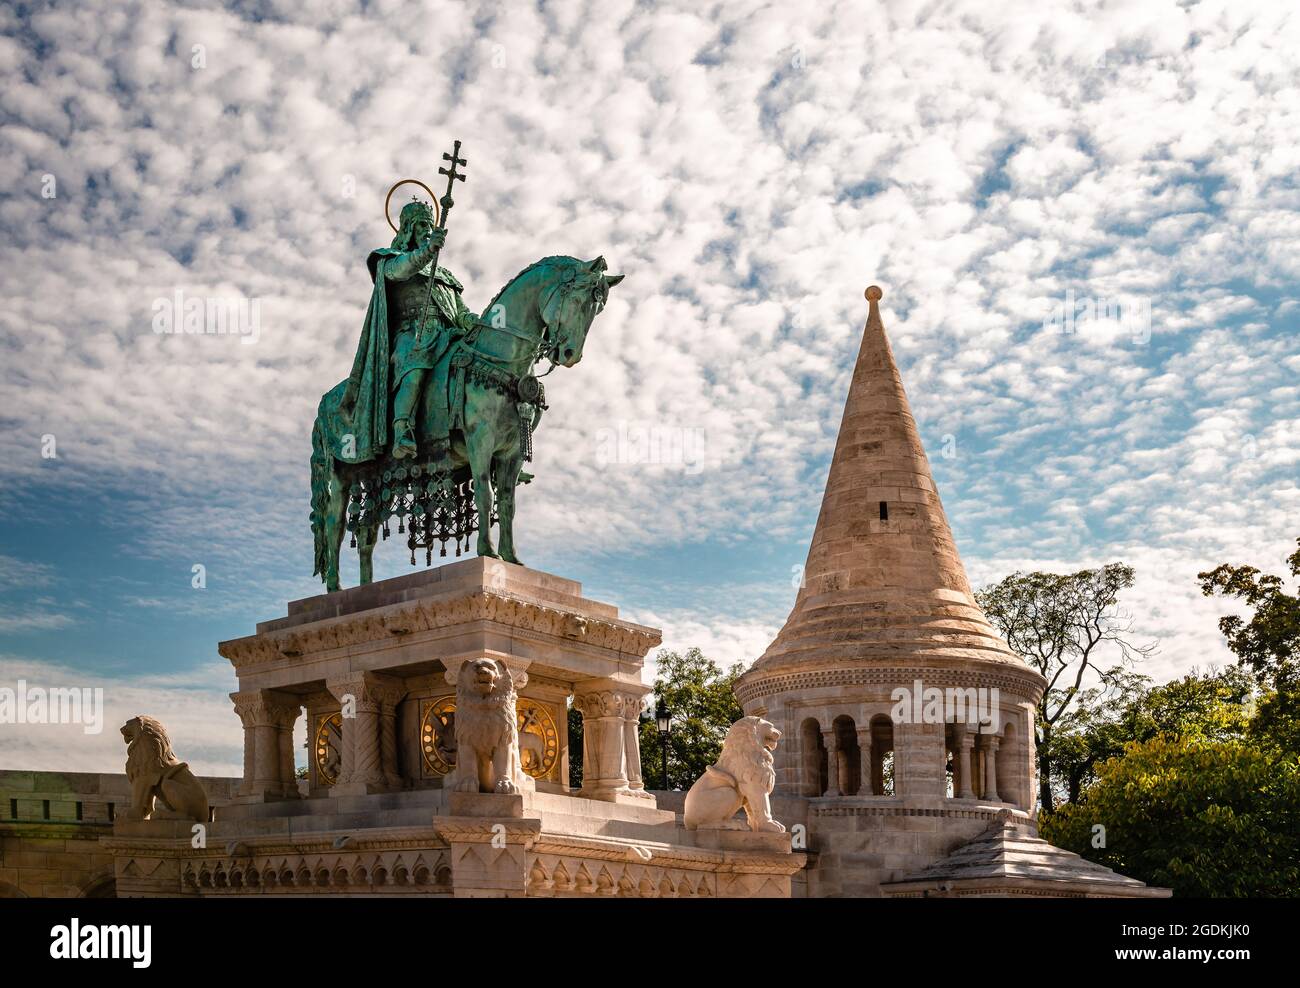 The Statue of Saint Stephen (Stephen I, first king of Hungary), in  the southern court of the Fisherman's Bastion in Budapest. Stock Photo